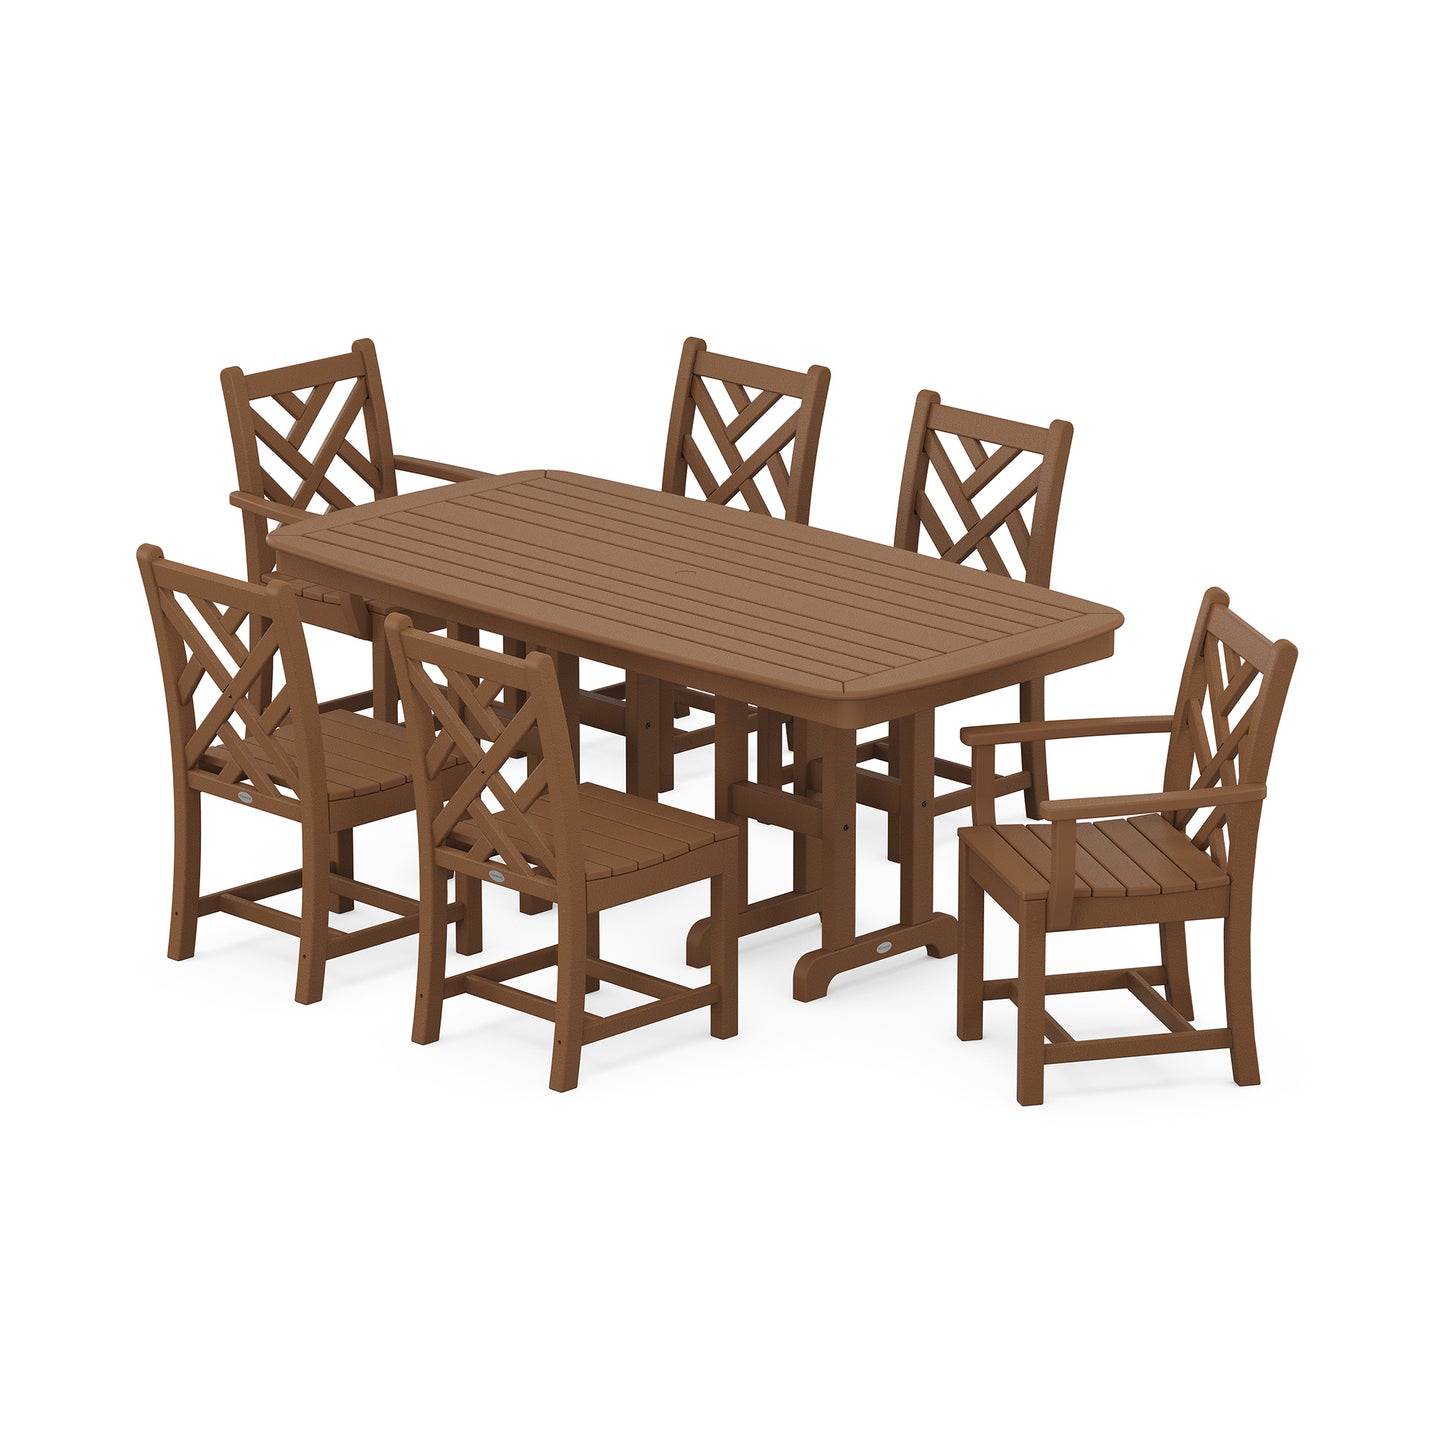 A brown POLYWOOD® Chippendale 7-Piece Dining Set featuring a rectangular table and six chairs with criss-cross design on a plain white background.